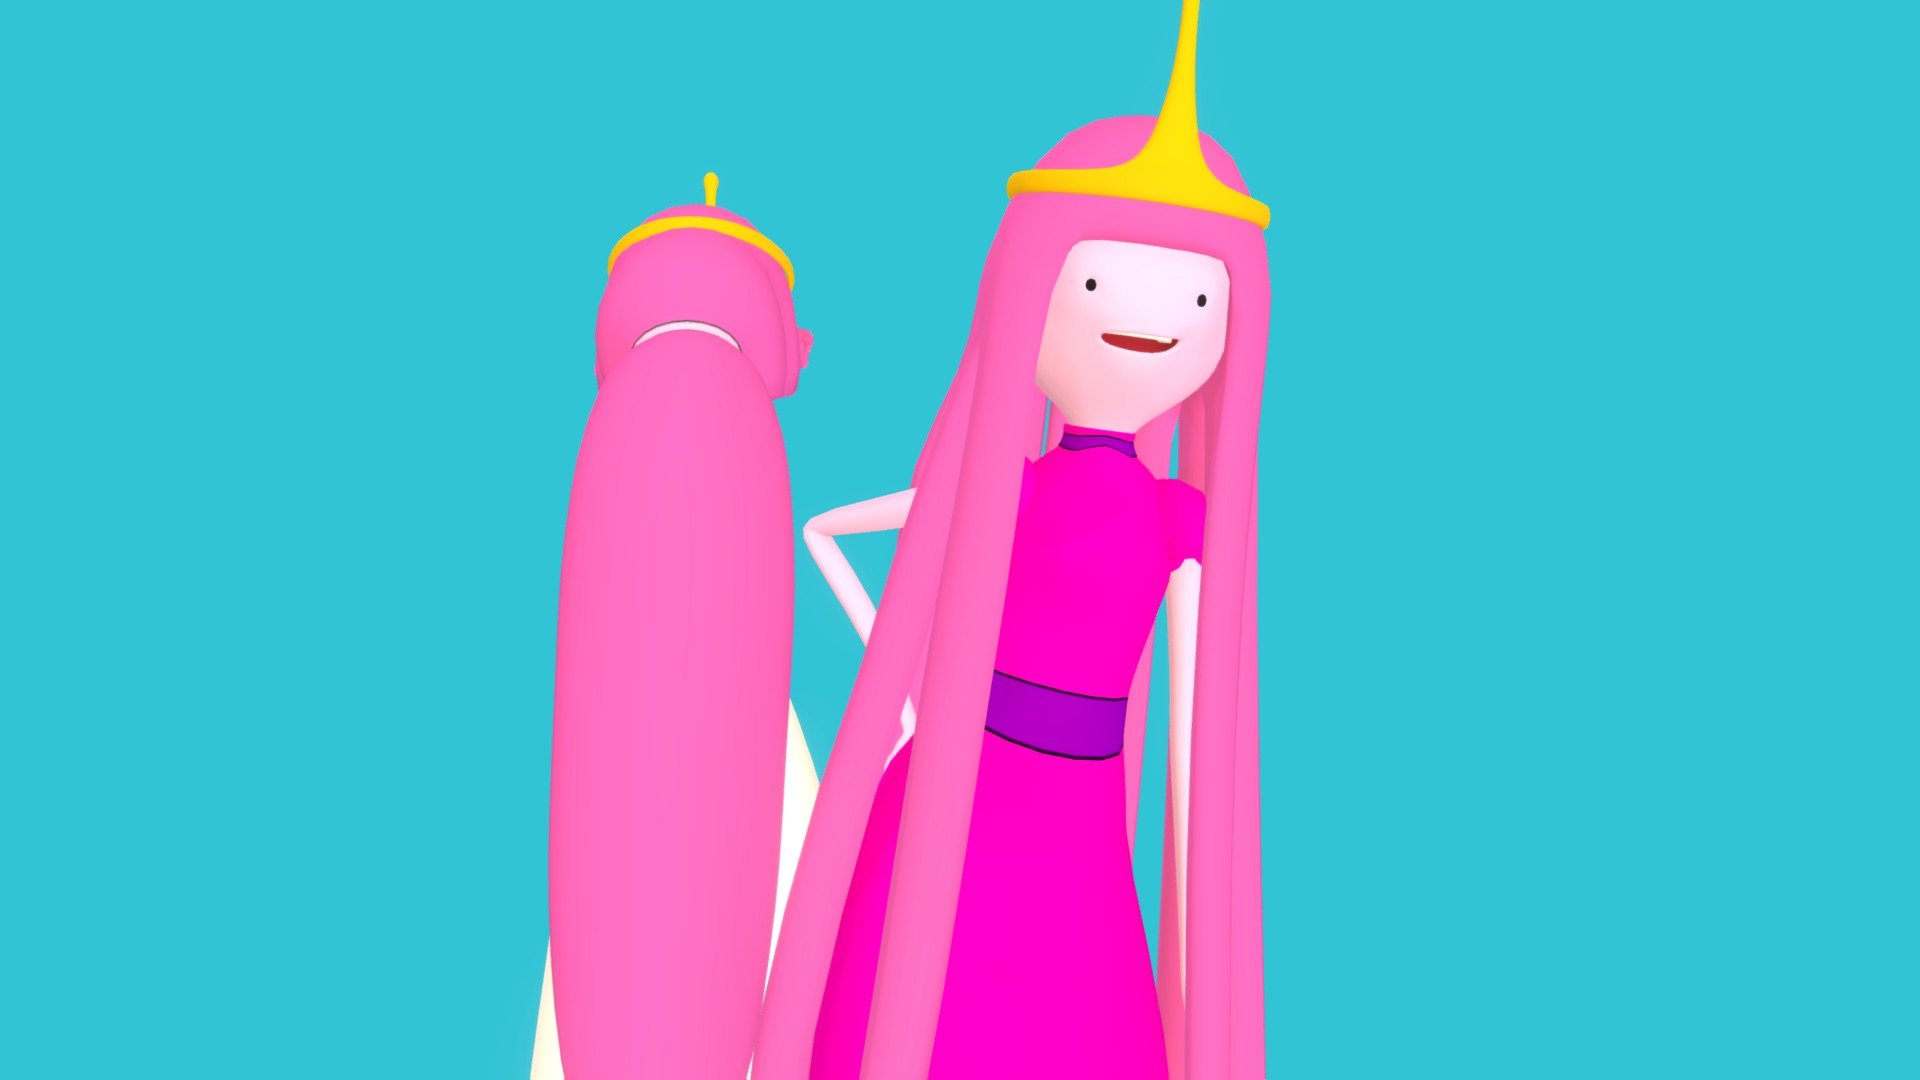 You know what time it is!  

I created these two models a while ago and ended up posting them here! I recommend checking it out in shadless mode too, since it fits with the shows style! - Adventure Time: Princess BubbleGum - 3D model by ASideOfChidori 3d model